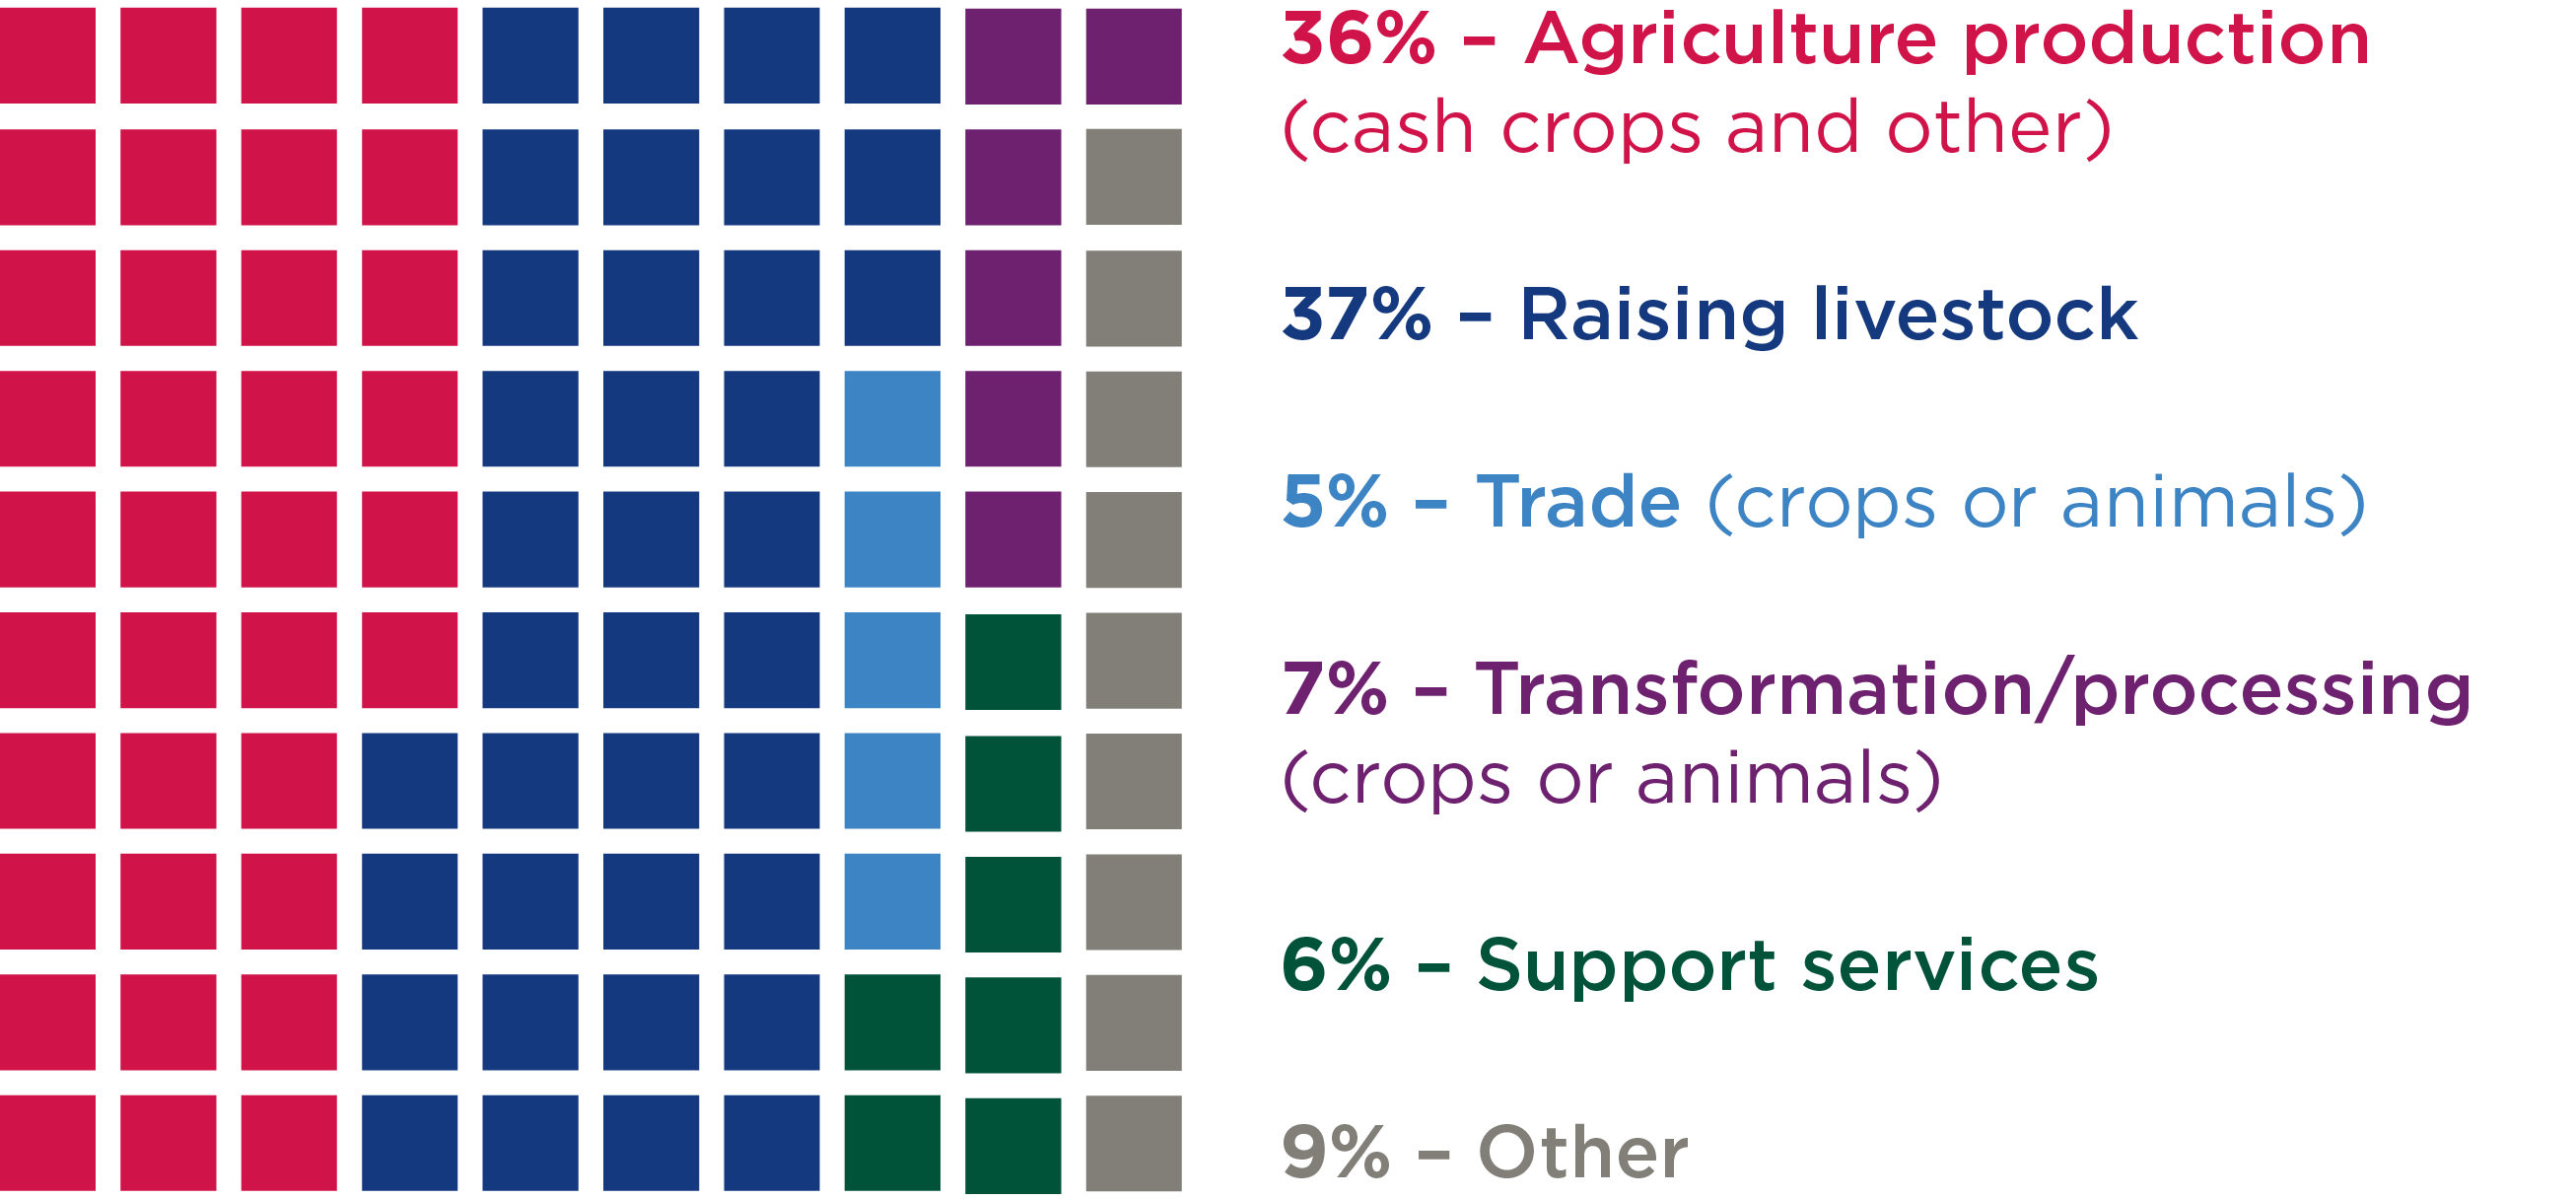 Financial beneficiaries in the agriculture production sector received 36% of loans 